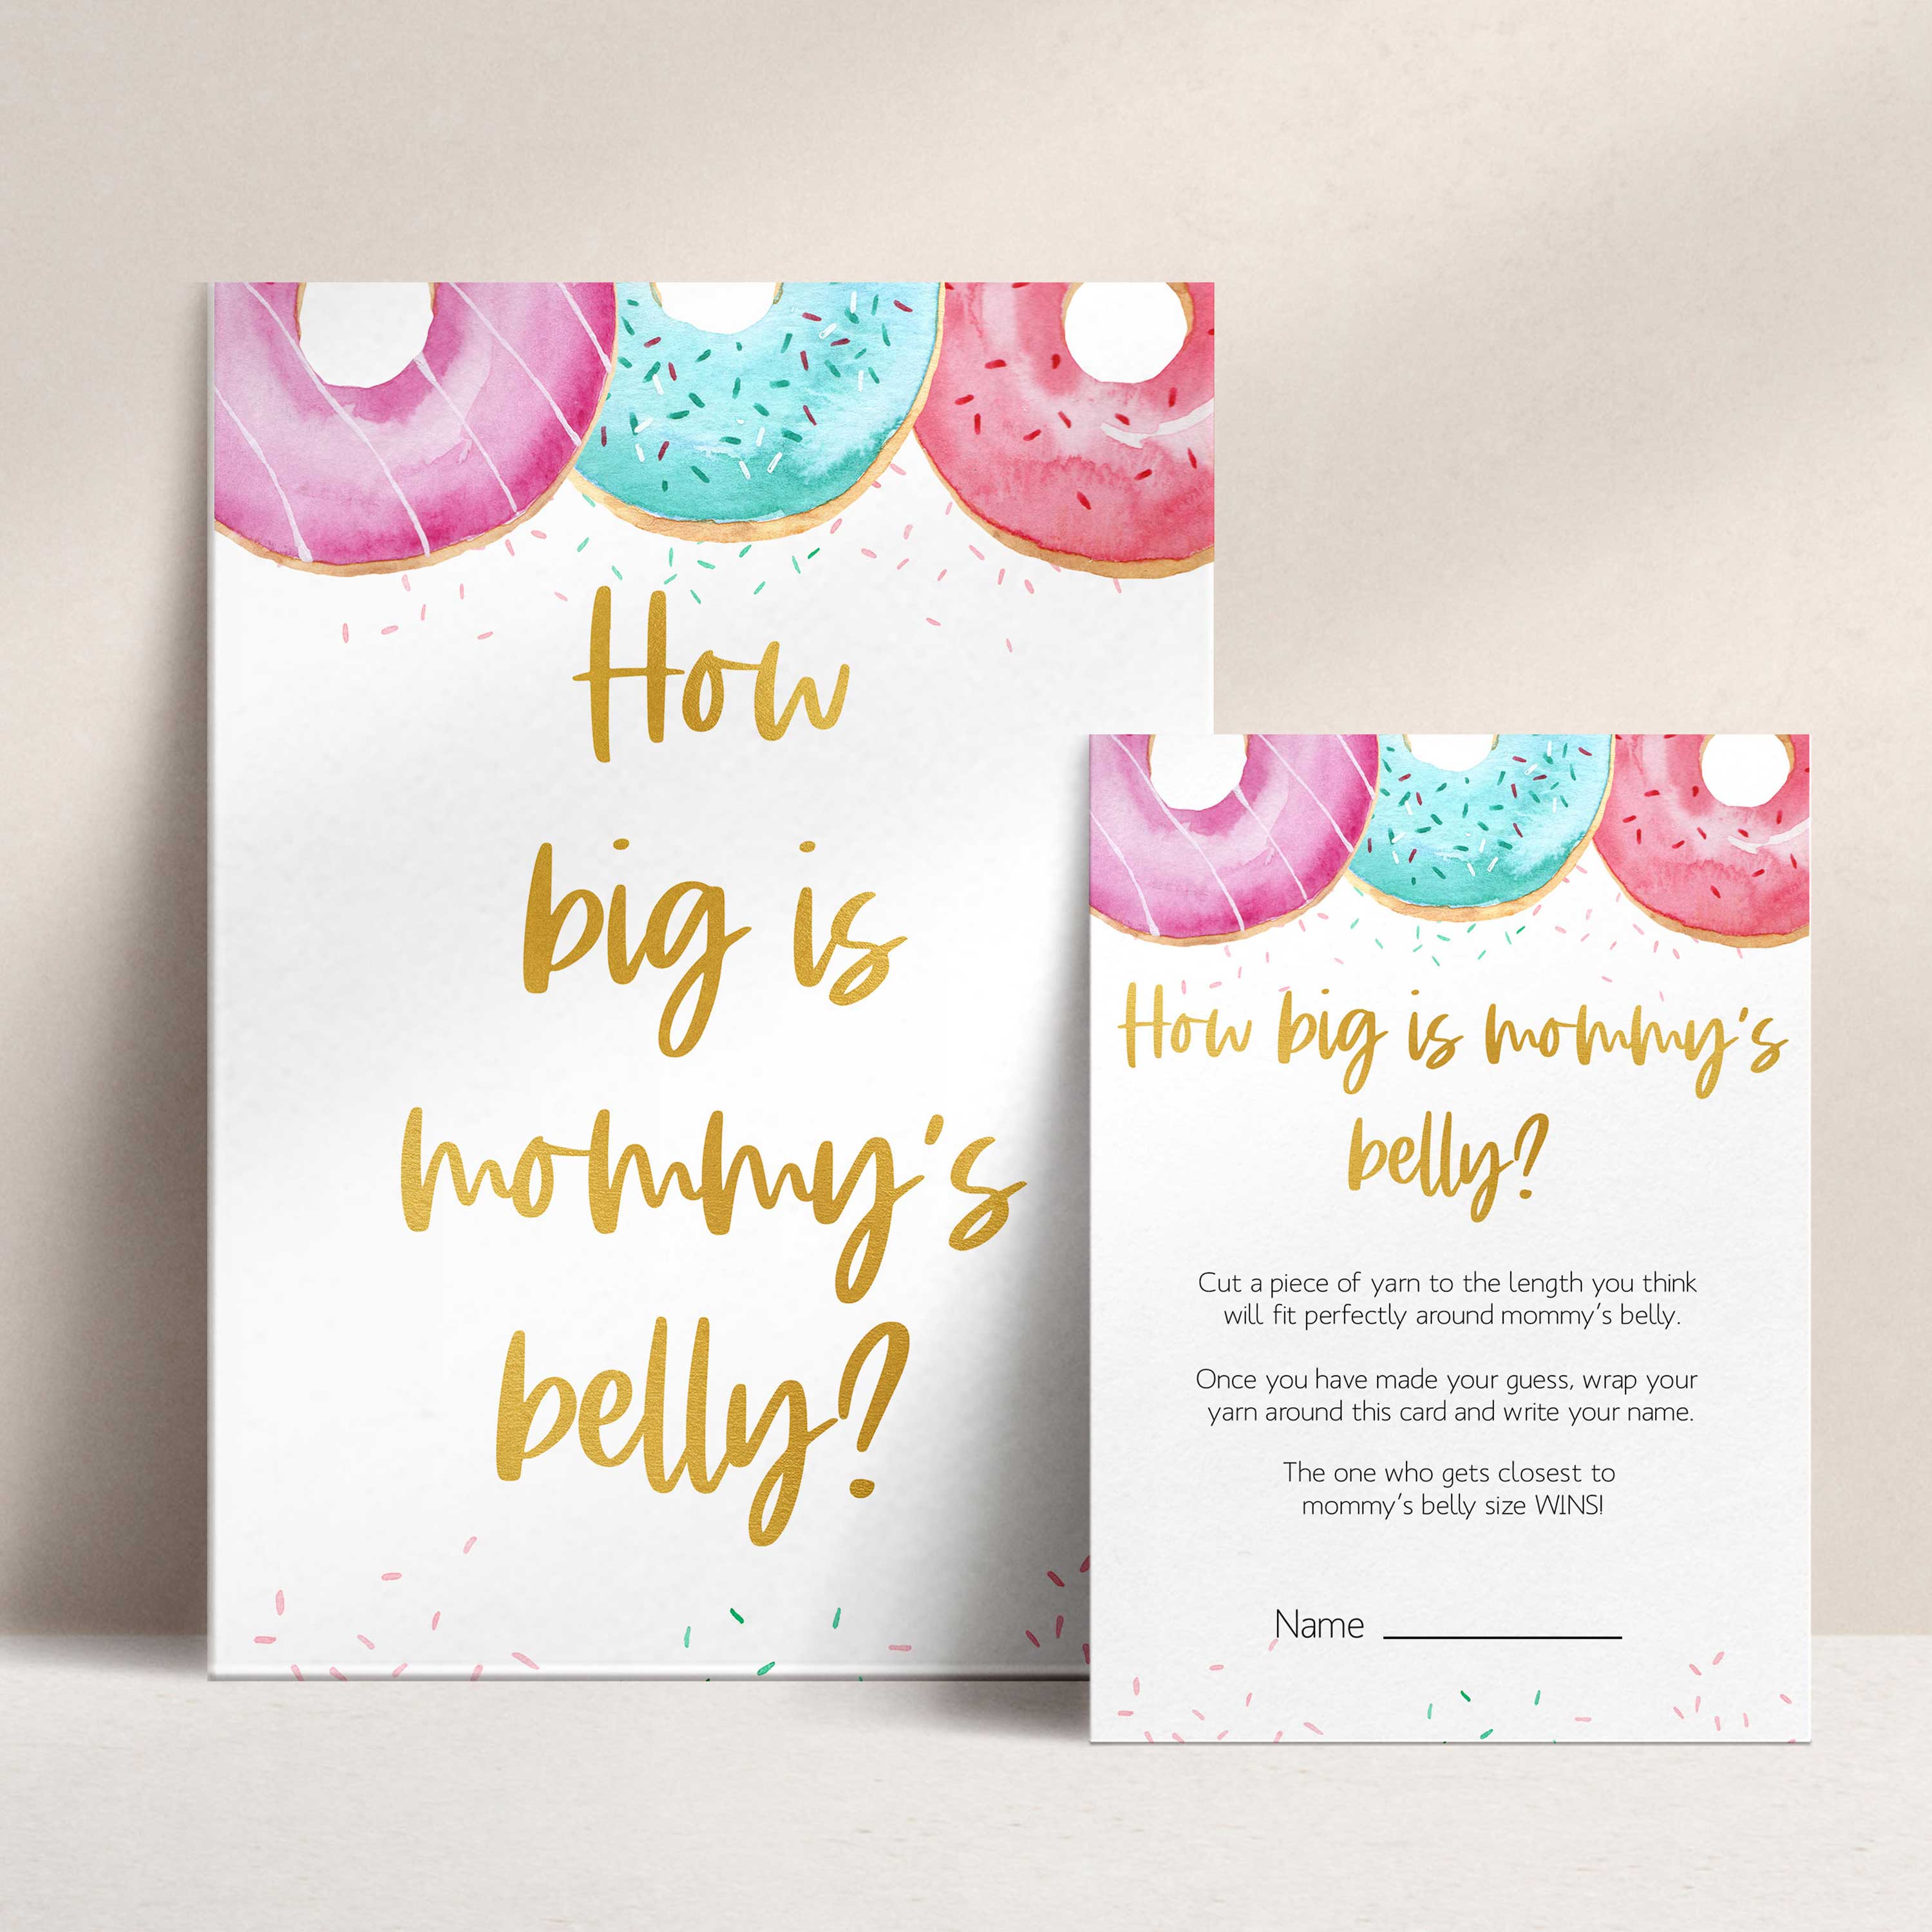 how big is mommys belly game, Printable baby shower games, donut baby games, baby shower games, fun baby shower ideas, top baby shower ideas, donut sprinkles baby shower, baby shower games, fun donut baby shower ideas